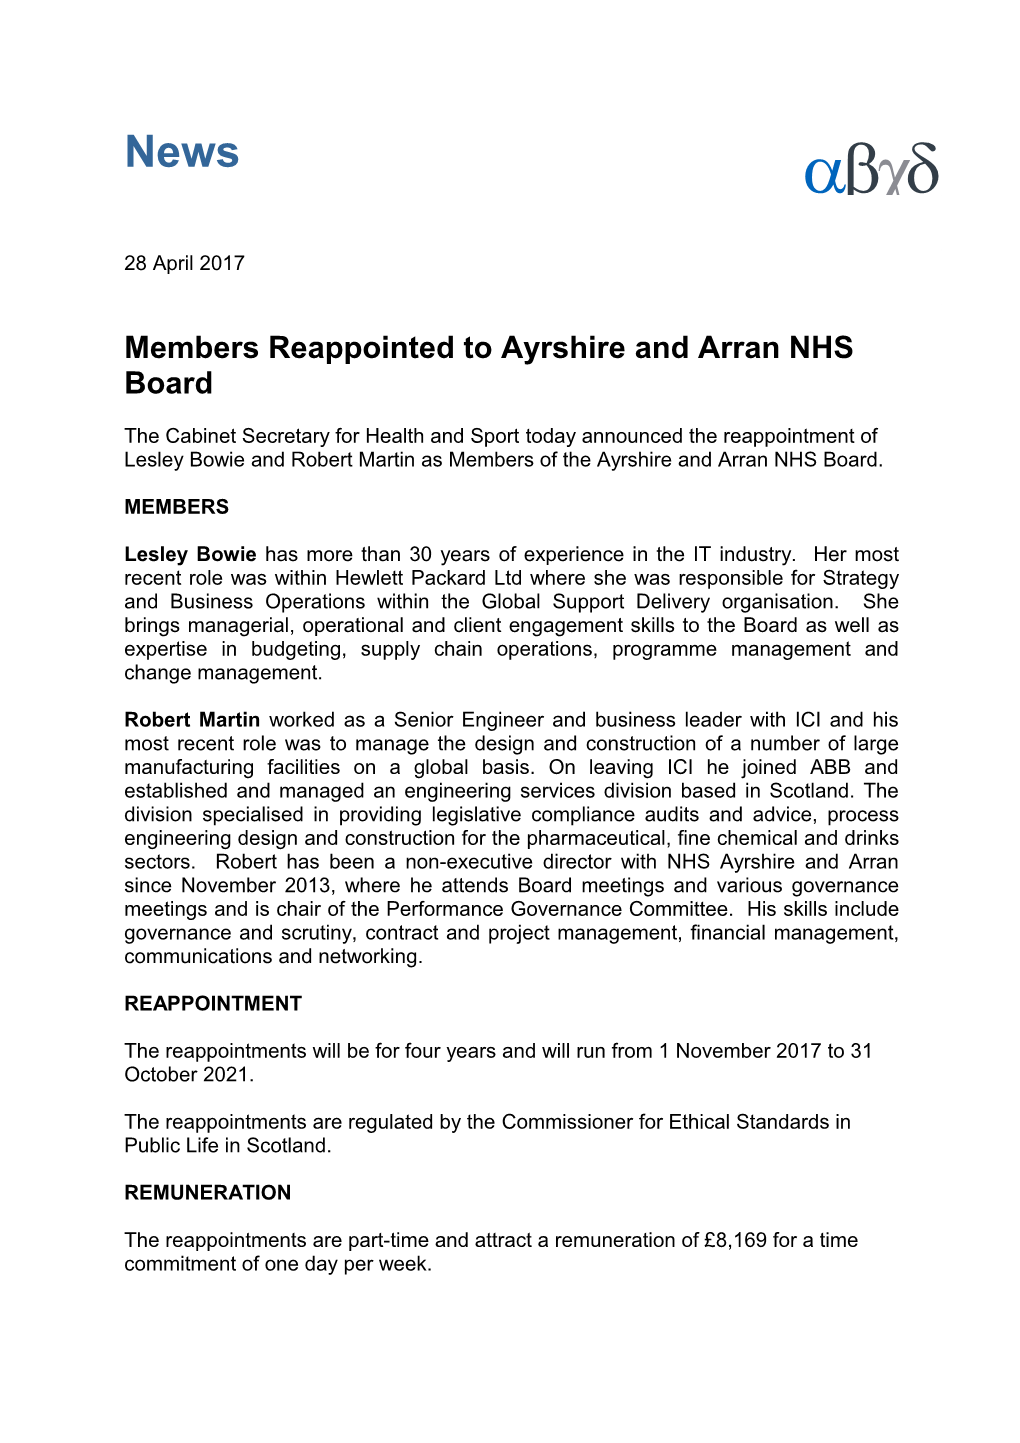 Members Reappointed to Ayrshire and Arran NHS Board